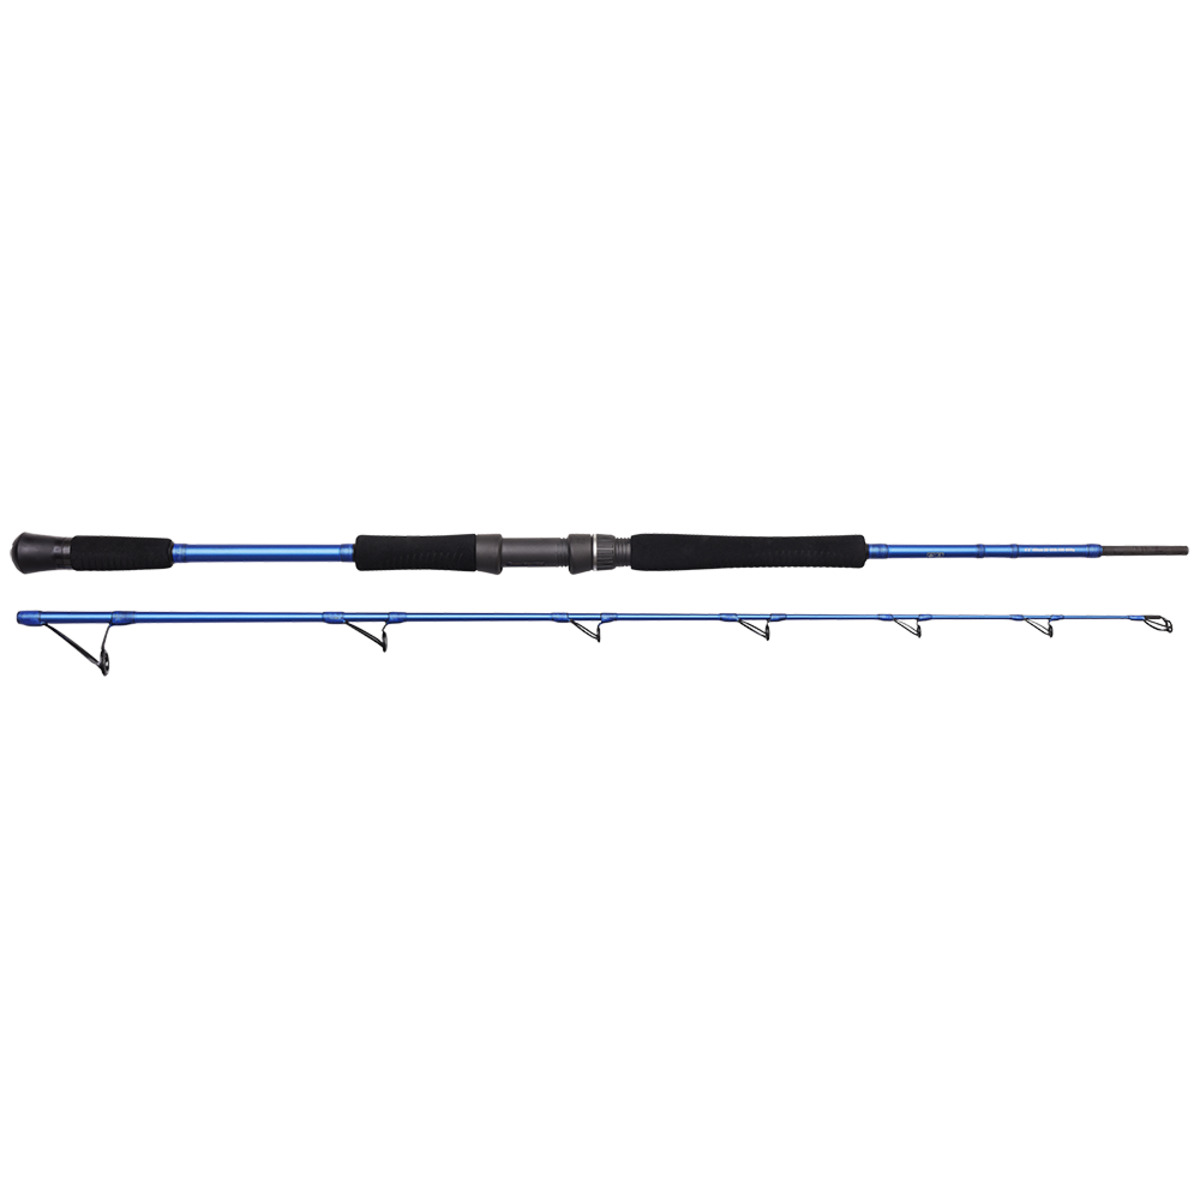 Savage Gear Sgs4 Boat Game - 6 ft 3 ft /1.90M MF 150-400G/XH 20-30LB 2SEC